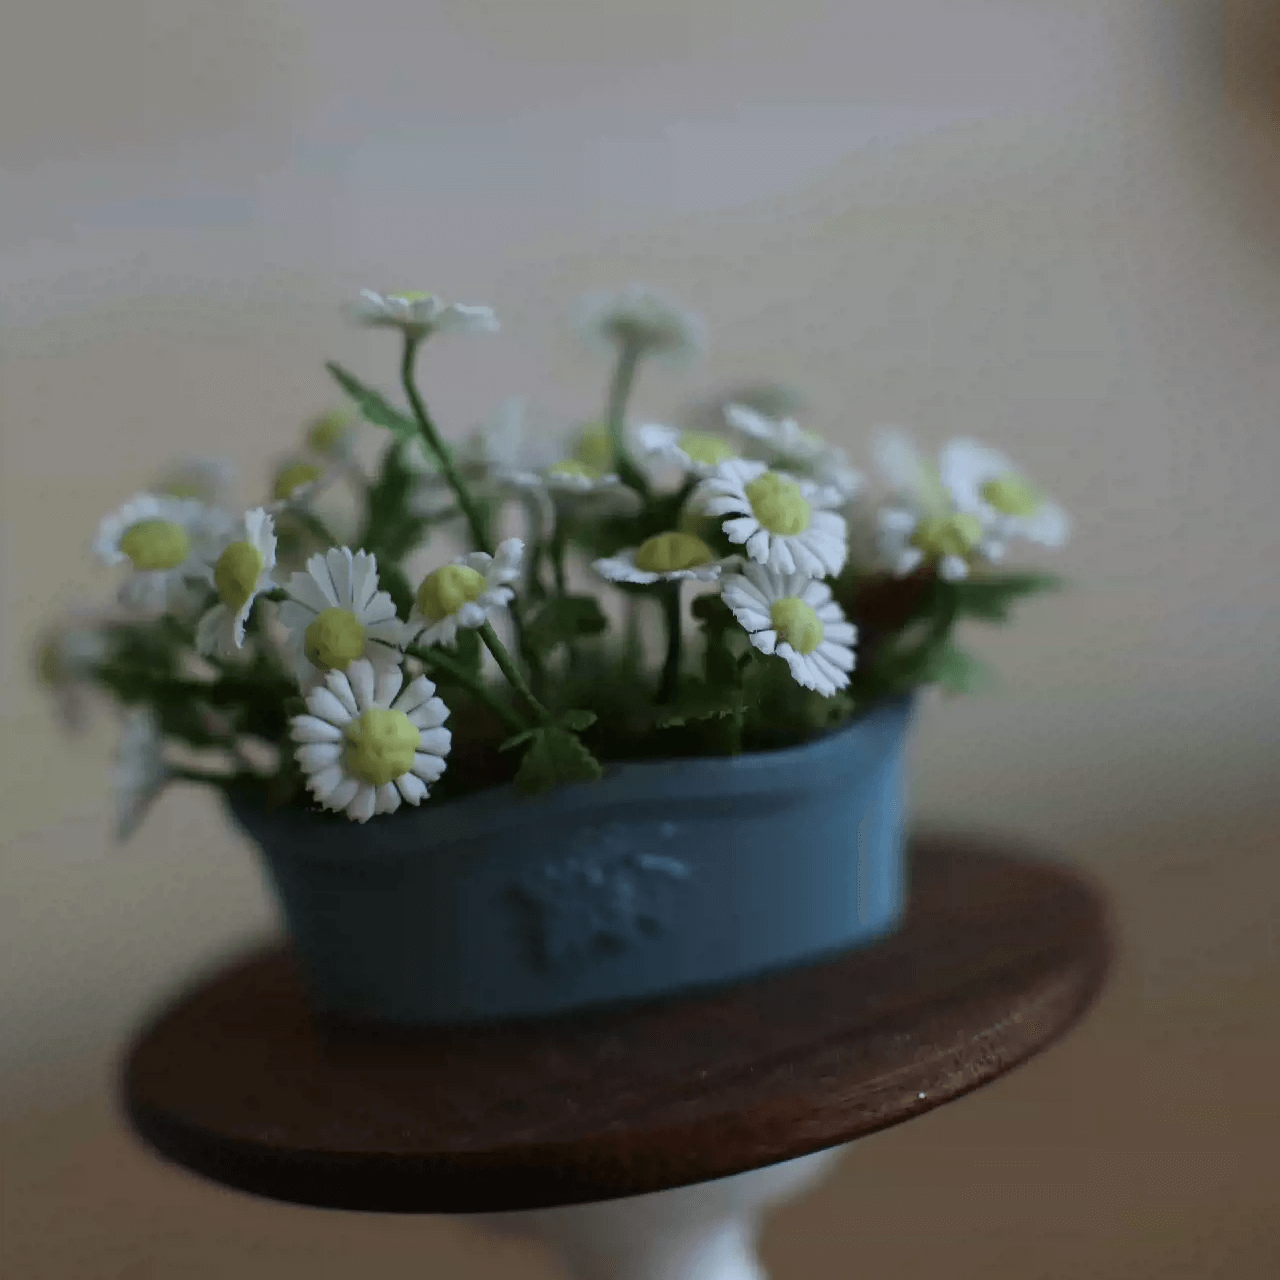 Bellis perennis is a very common European species of daisy, of the Asteraceae family, often considered the model type for the name "daisy".  Material: Handmade from Clay